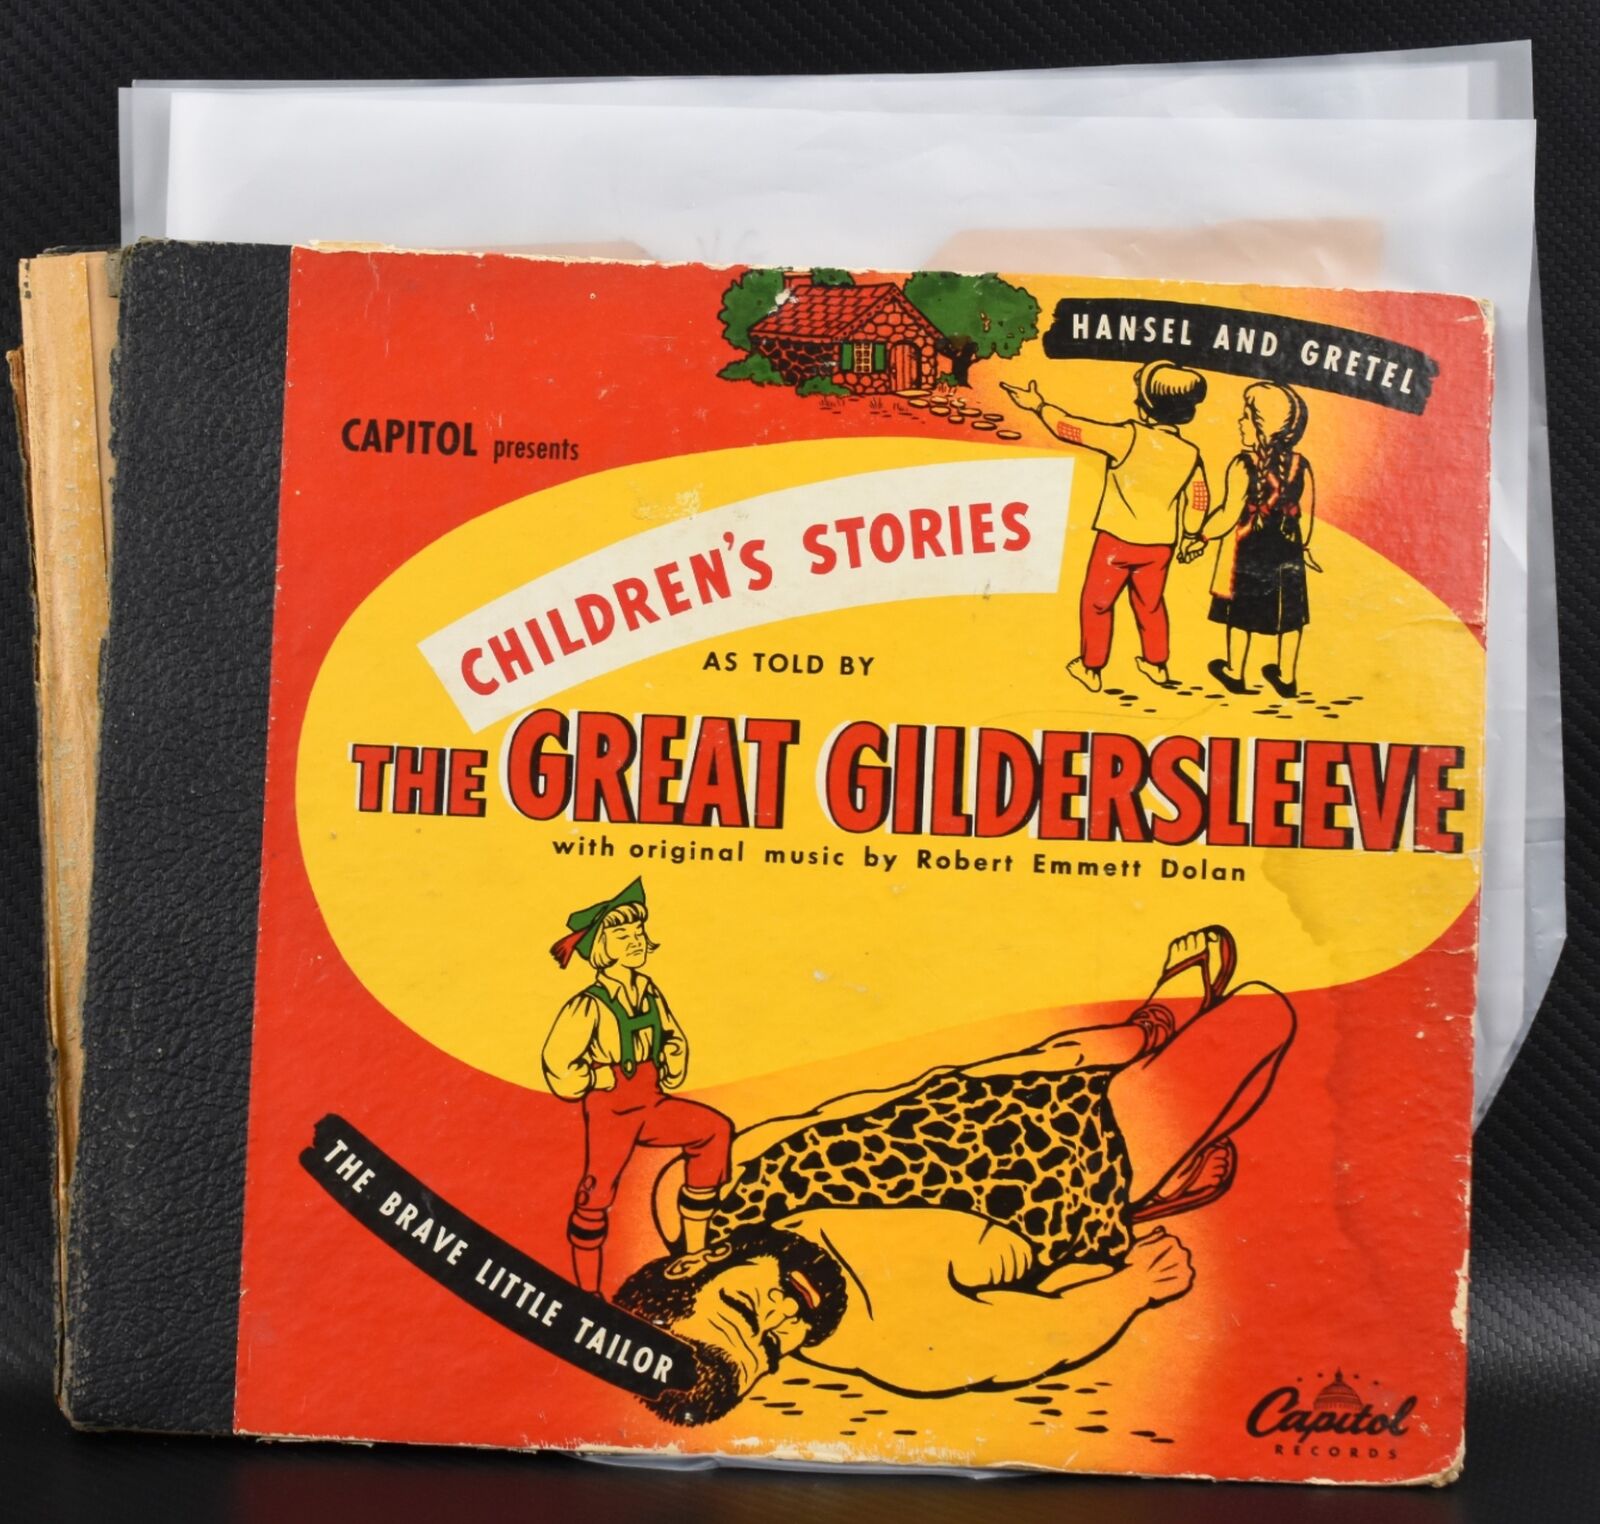 Vintage Capitol Records: Children's Stories by Gildersleeve, 4 Records, VG/VG+